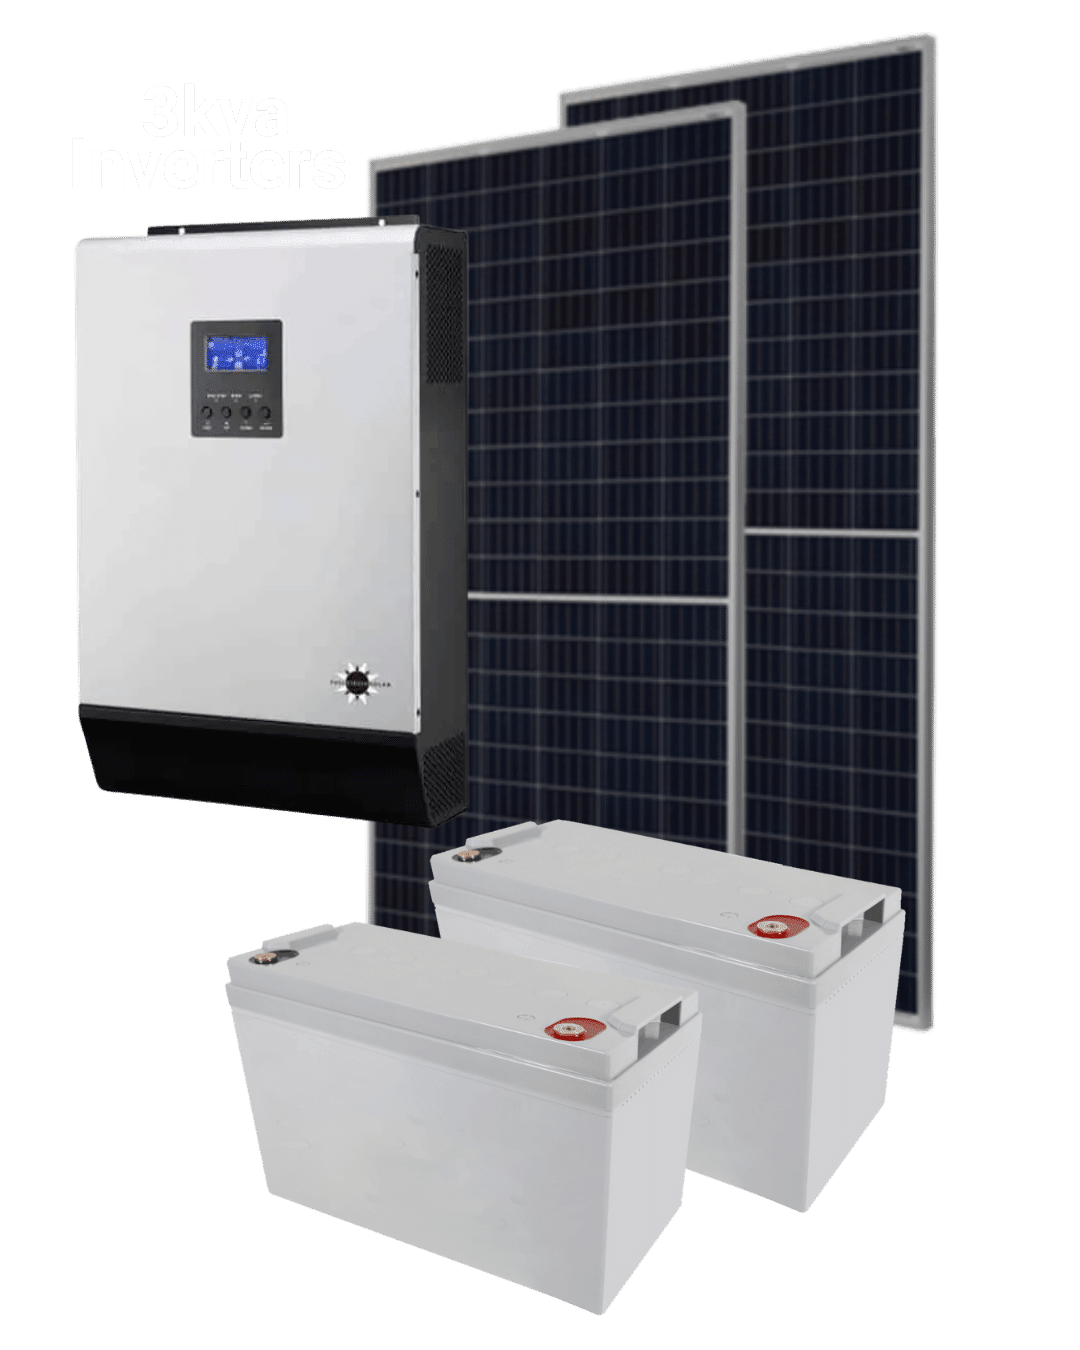 3kva Inverter From Electrical Services Joburg, Buhlebethu Consulting for all your electrical service needs from   solar power, solar power near me, solar energy, solar energy near me, solar solutions, solar solutions near me, Solar Power Services, Solar Power Services near me, Solar Power Services Johannesburg, Solar Power Services Joburg, Solar Power Services Sandton, Solar Power Services Gauteng, Solar Power Services Fourways, Solar Power Solutions, Solar Power Solutions near me, Solar Power Solutions Johannesburg, Solar Power Solutions Joburg, Solar Power Solutions Sandton, Solar Power Solutions Gauteng, Solar Power Solutions Fourways, Solar Energy Services, Solar Energy Services near me, Solar Energy Services Johannesburg, Solar Energy Services Joburg, Solar Energy Services Sandton, Solar Energy Services Gauteng, Solar Energy Services Fourways, Solar Energy Solutions, Solar Energy Solutions near me, Solar Energy Solutions Johannesburg, Solar Energy Solutions Joburg, Solar Energy Solutions Sandton, Solar Energy Solutions Gauteng, Solar Energy Solutions Fourways, Loadshedding Solutions, Load Shedding Solutions, Loadshedding Solutions near me, Load Shedding Solutions near me, Loadshedding Solutions Johannesburg, Load Shedding Solutions Johannesburg, Loadshedding Solutions Joburg, Load Shedding Solutions Joburg, Solar Panels Johannesburg, Solar Panels Joburg, Solar Panels Sandton, Solar Panels Gauteng, Solar Panels Fourways, Solar Panels Near Me, Inverter, Solar Inverter, Solar Power Inverter, Solar Energy Inverter, 3kva Inverter, 5kva Inverter, 10kva Inverter, Inverter Near Me, Solar Inverter Near Me, Solar Power Inverter Near Me, Solar Energy Inverter Near Me, 3kva Inverter Near Me, 5kva Inverter Near Me, 10kva Inverter Near Me, Inverter Johannesburg, Solar Inverter Johannesburg, Solar Power Inverter Johannesburg, Solar Energy Inverter Johannesburg, 3kva Inverter Johannesburg, 5kva Inverter Johannesburg, 10kva Inverter Johannesburg, Electrical Installations, Electrical Installations near me, Electrical Installations Johannesburg, Electrical Installations Joburg, Electrical Installations Sandton, Electrical Installations Gauteng, Electrical Installations Fourways, Electrical Maintenance, Electrical Maintenance near me, Electrical Maintenance Johannesburg, Electrical Maintenance Joburg, Electrical Maintenance Sandton, Electrical Maintenance Gauteng, Electrical Maintenance Fourways, Electrical Repairs, Electrical Repairs near me, Electrical Repairs Johannesburg, Electrical Repairs Joburg, Electrical Repairs Sandton, Electrical Repairs Gauteng, Electrical Repairs Fourways, Lighting Installations, Lighting Installations near me, Lighting Installations Johannesburg, Lighting Installations Joburg, Lighting Installations Sandton, Lighting Installations Gauteng, Lighting Installations Fourways, Electrical Construction, Electrical Construction near me, Electrical Construction Johannesburg, Electrical Construction Joburg, Electrical Construction Sandton, Electrical Construction Gauteng, Electrical Construction Fourways, Electrician, Electrician near me, Electrician Johannesburg, Electrician Joburg, Electrician Sandton, Electrician Gauteng, Electrician Fourways, Electrician Service, Electrician Service near me, Electrician Service Johannesburg, Electrician Service Joburg, Electrician Service Sandton, Electrician Service Gauteng, Electrician Service Fourways